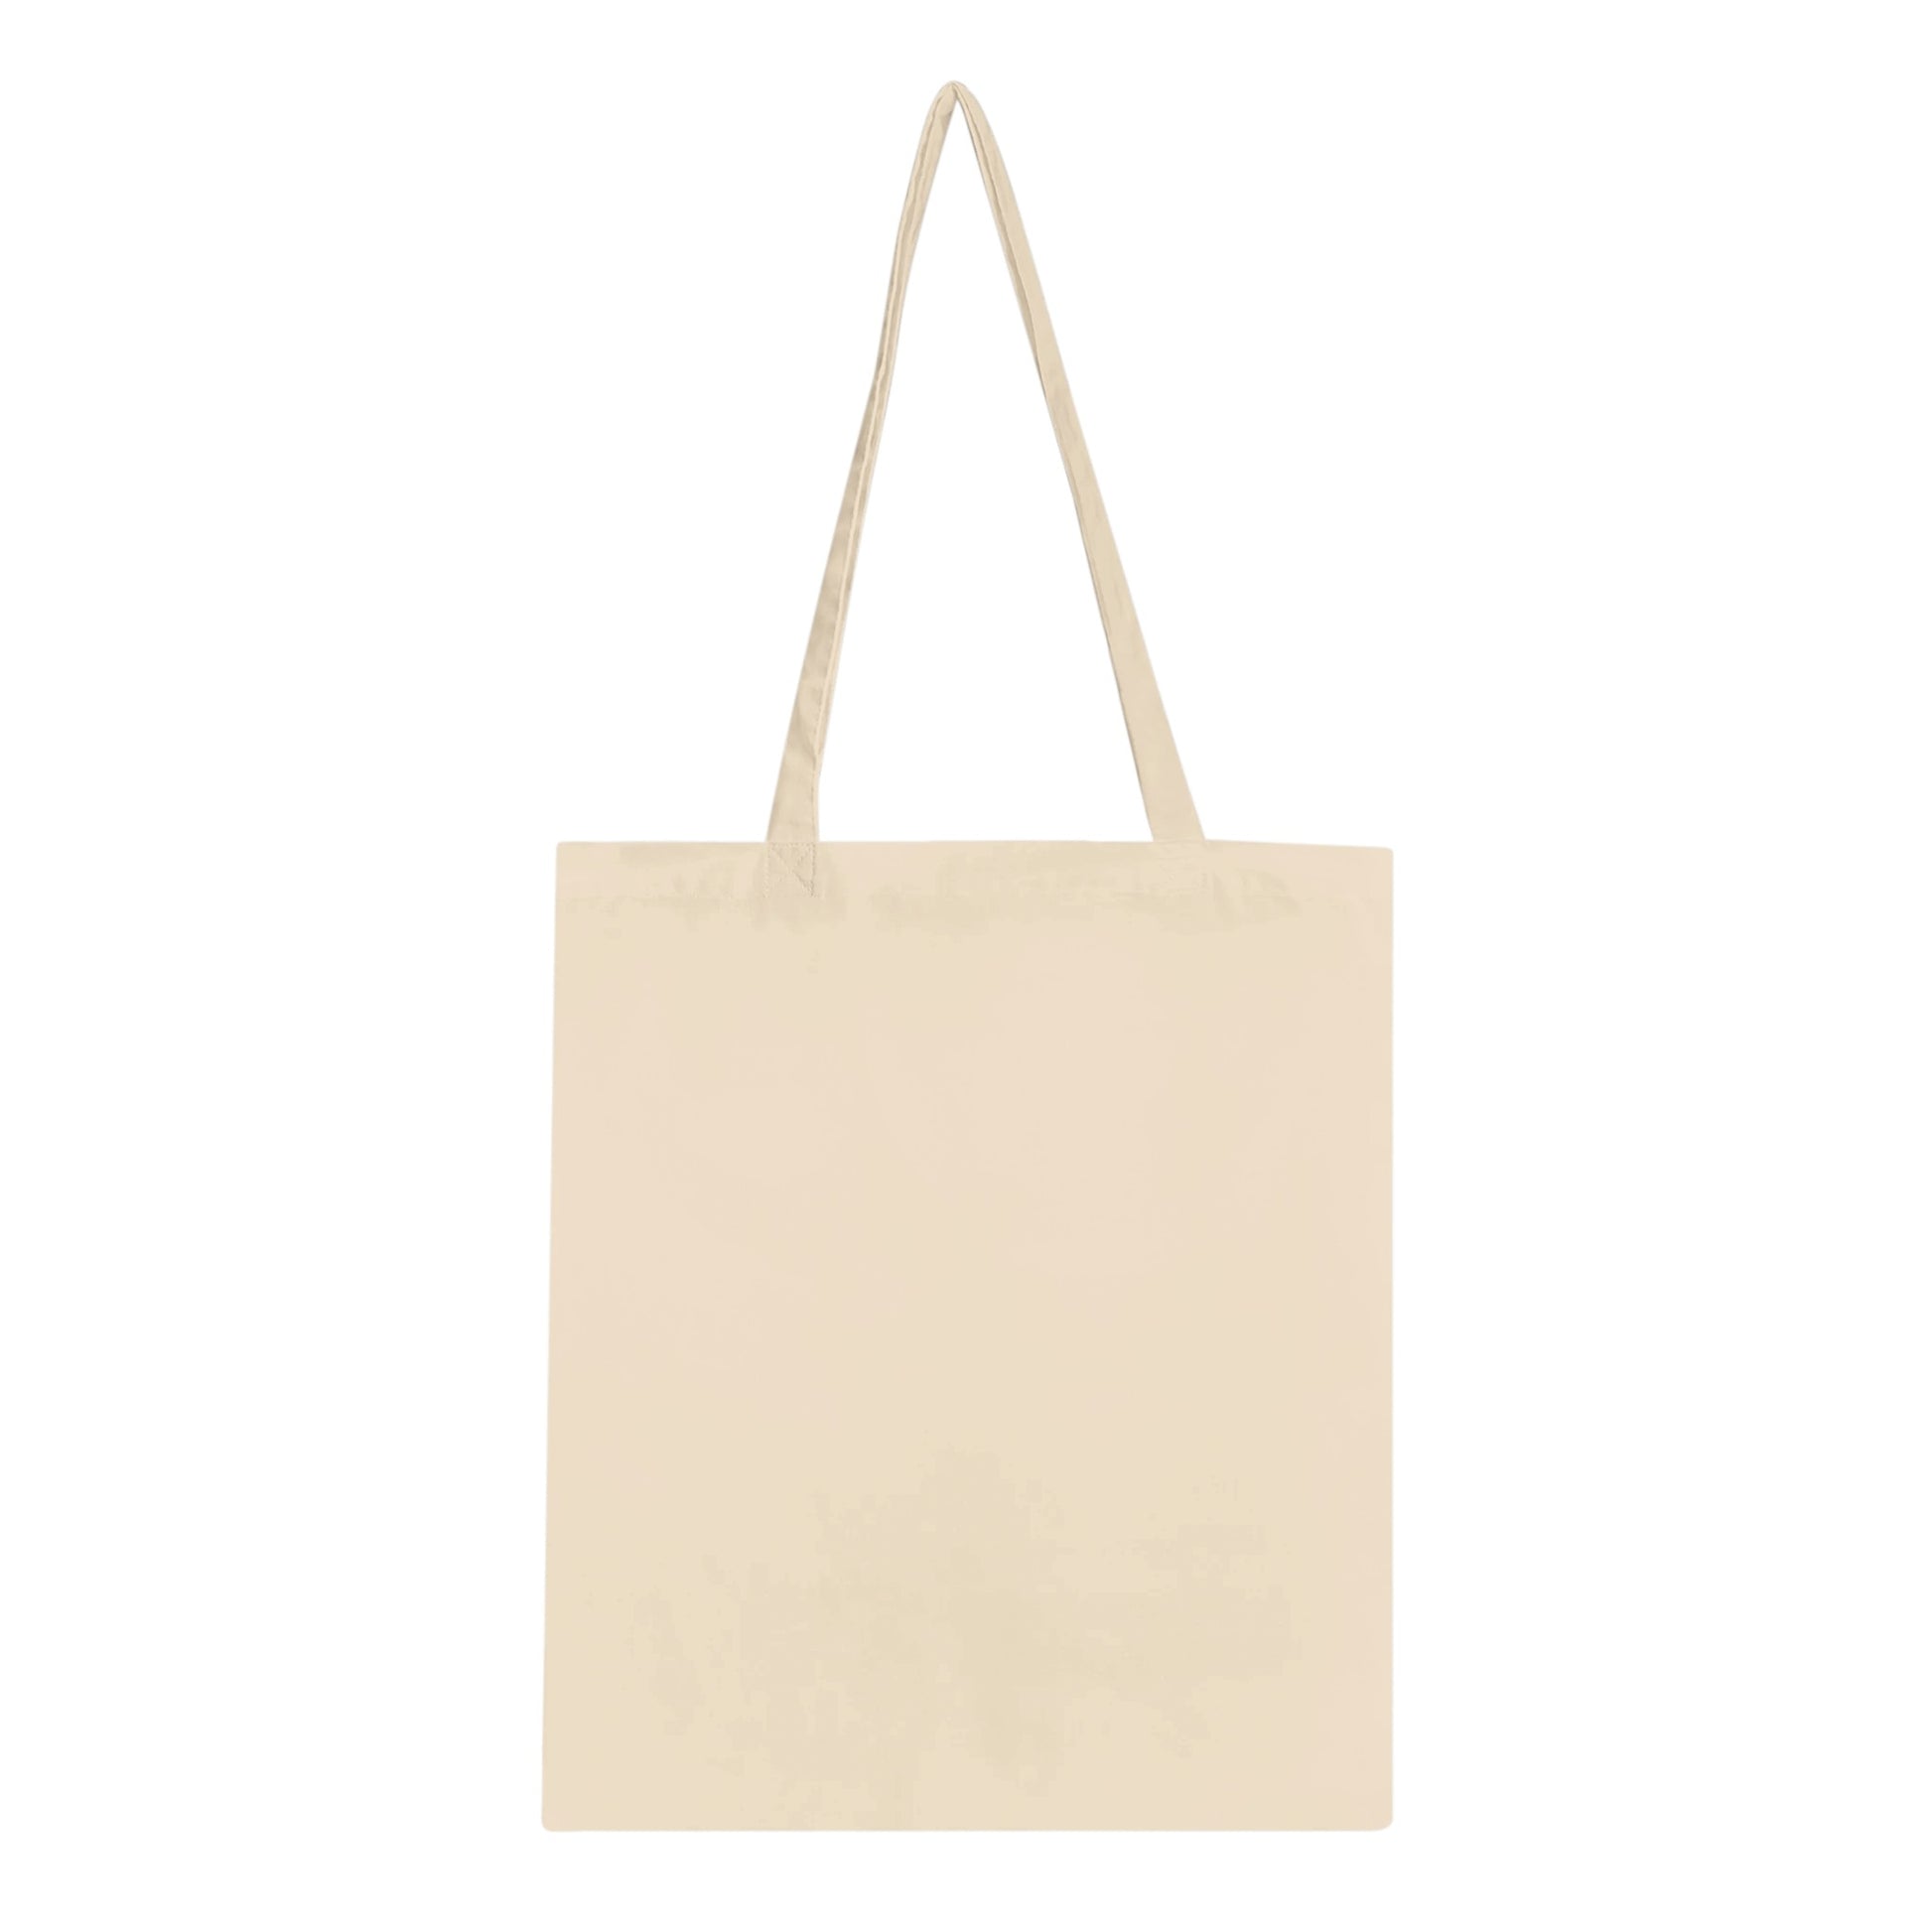 PAUL KLEE - ONE WHO UNDERSTANDS - CLASSIC TOTE BAG 